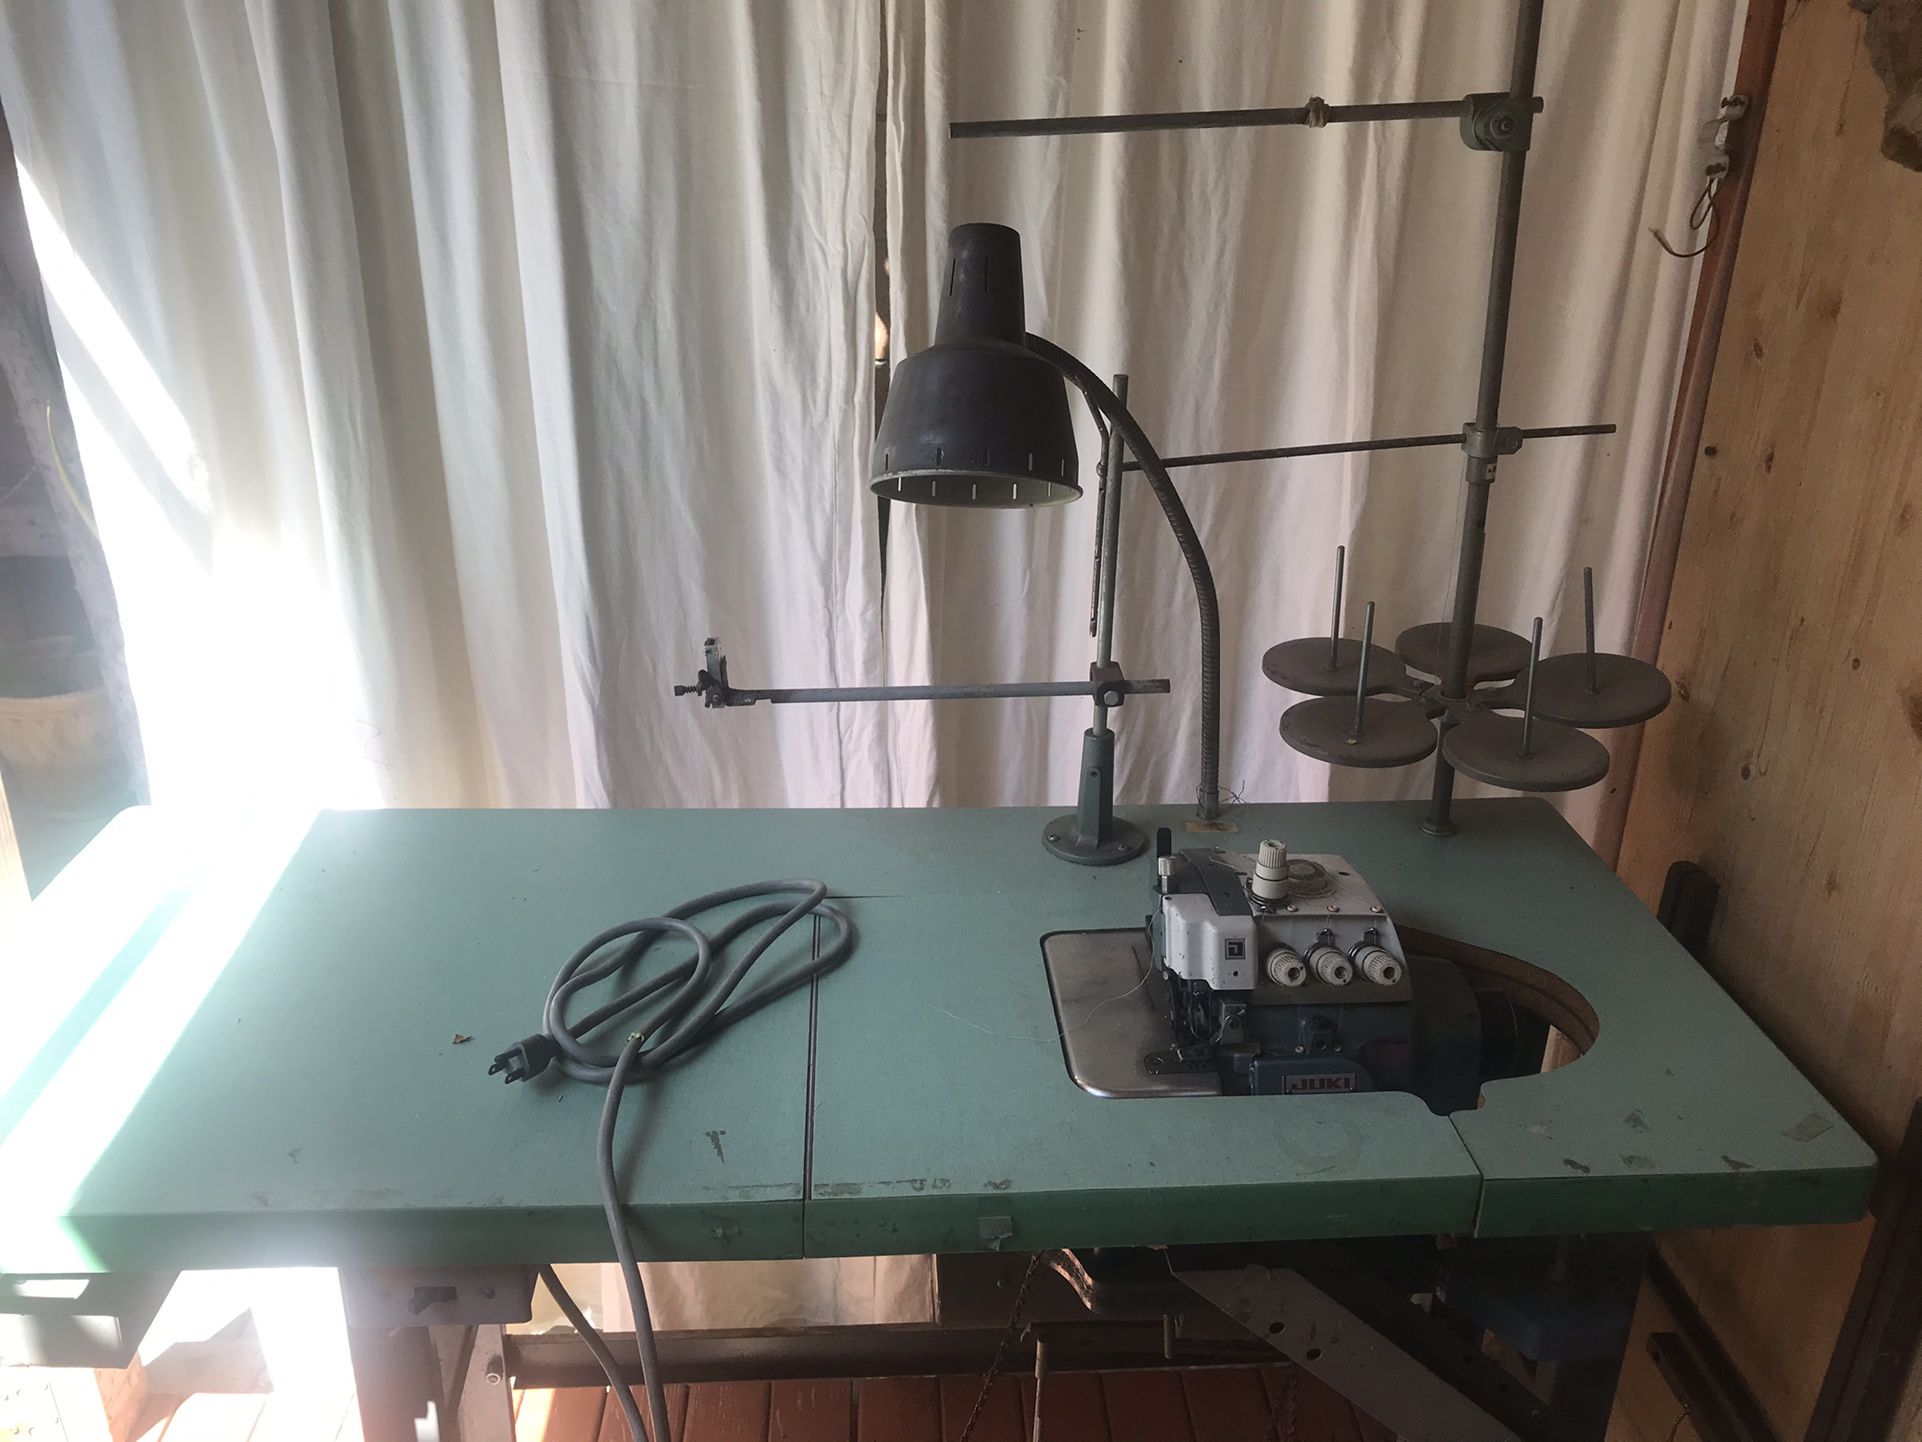 Juki MO-816 Industrial Sewing Machine on Table